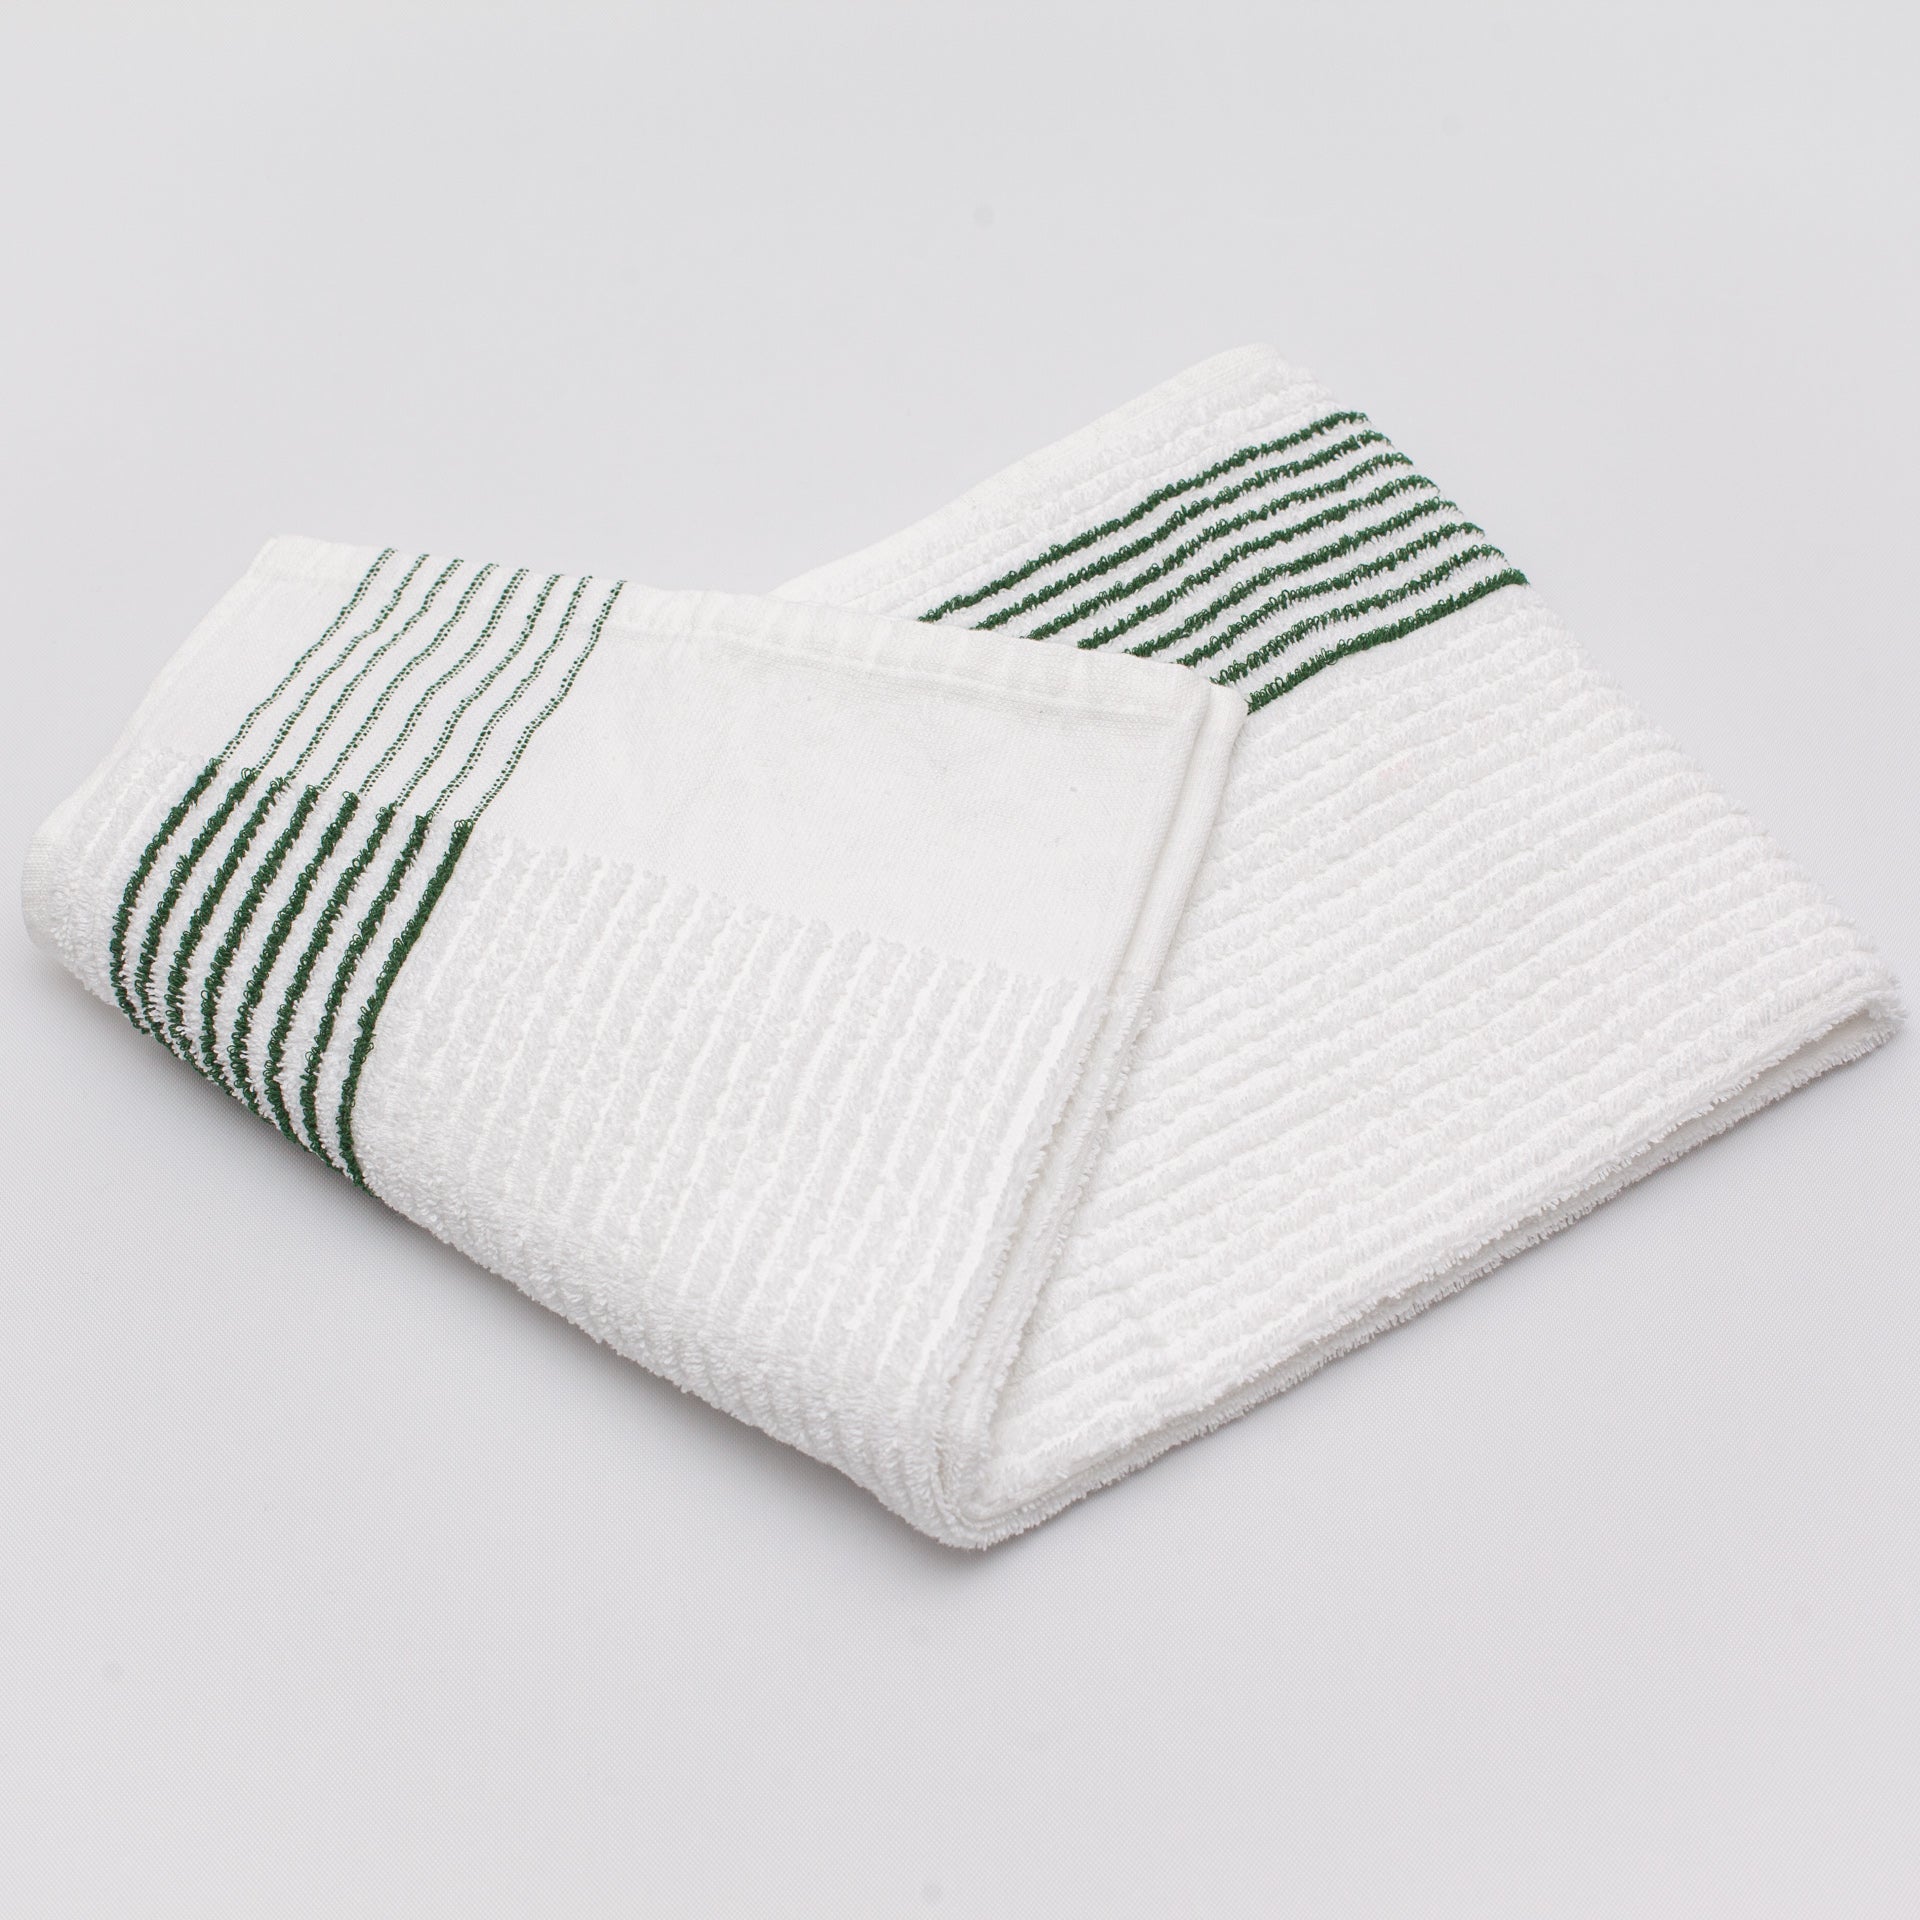 caddy towel with green stripes laying folded on a white background